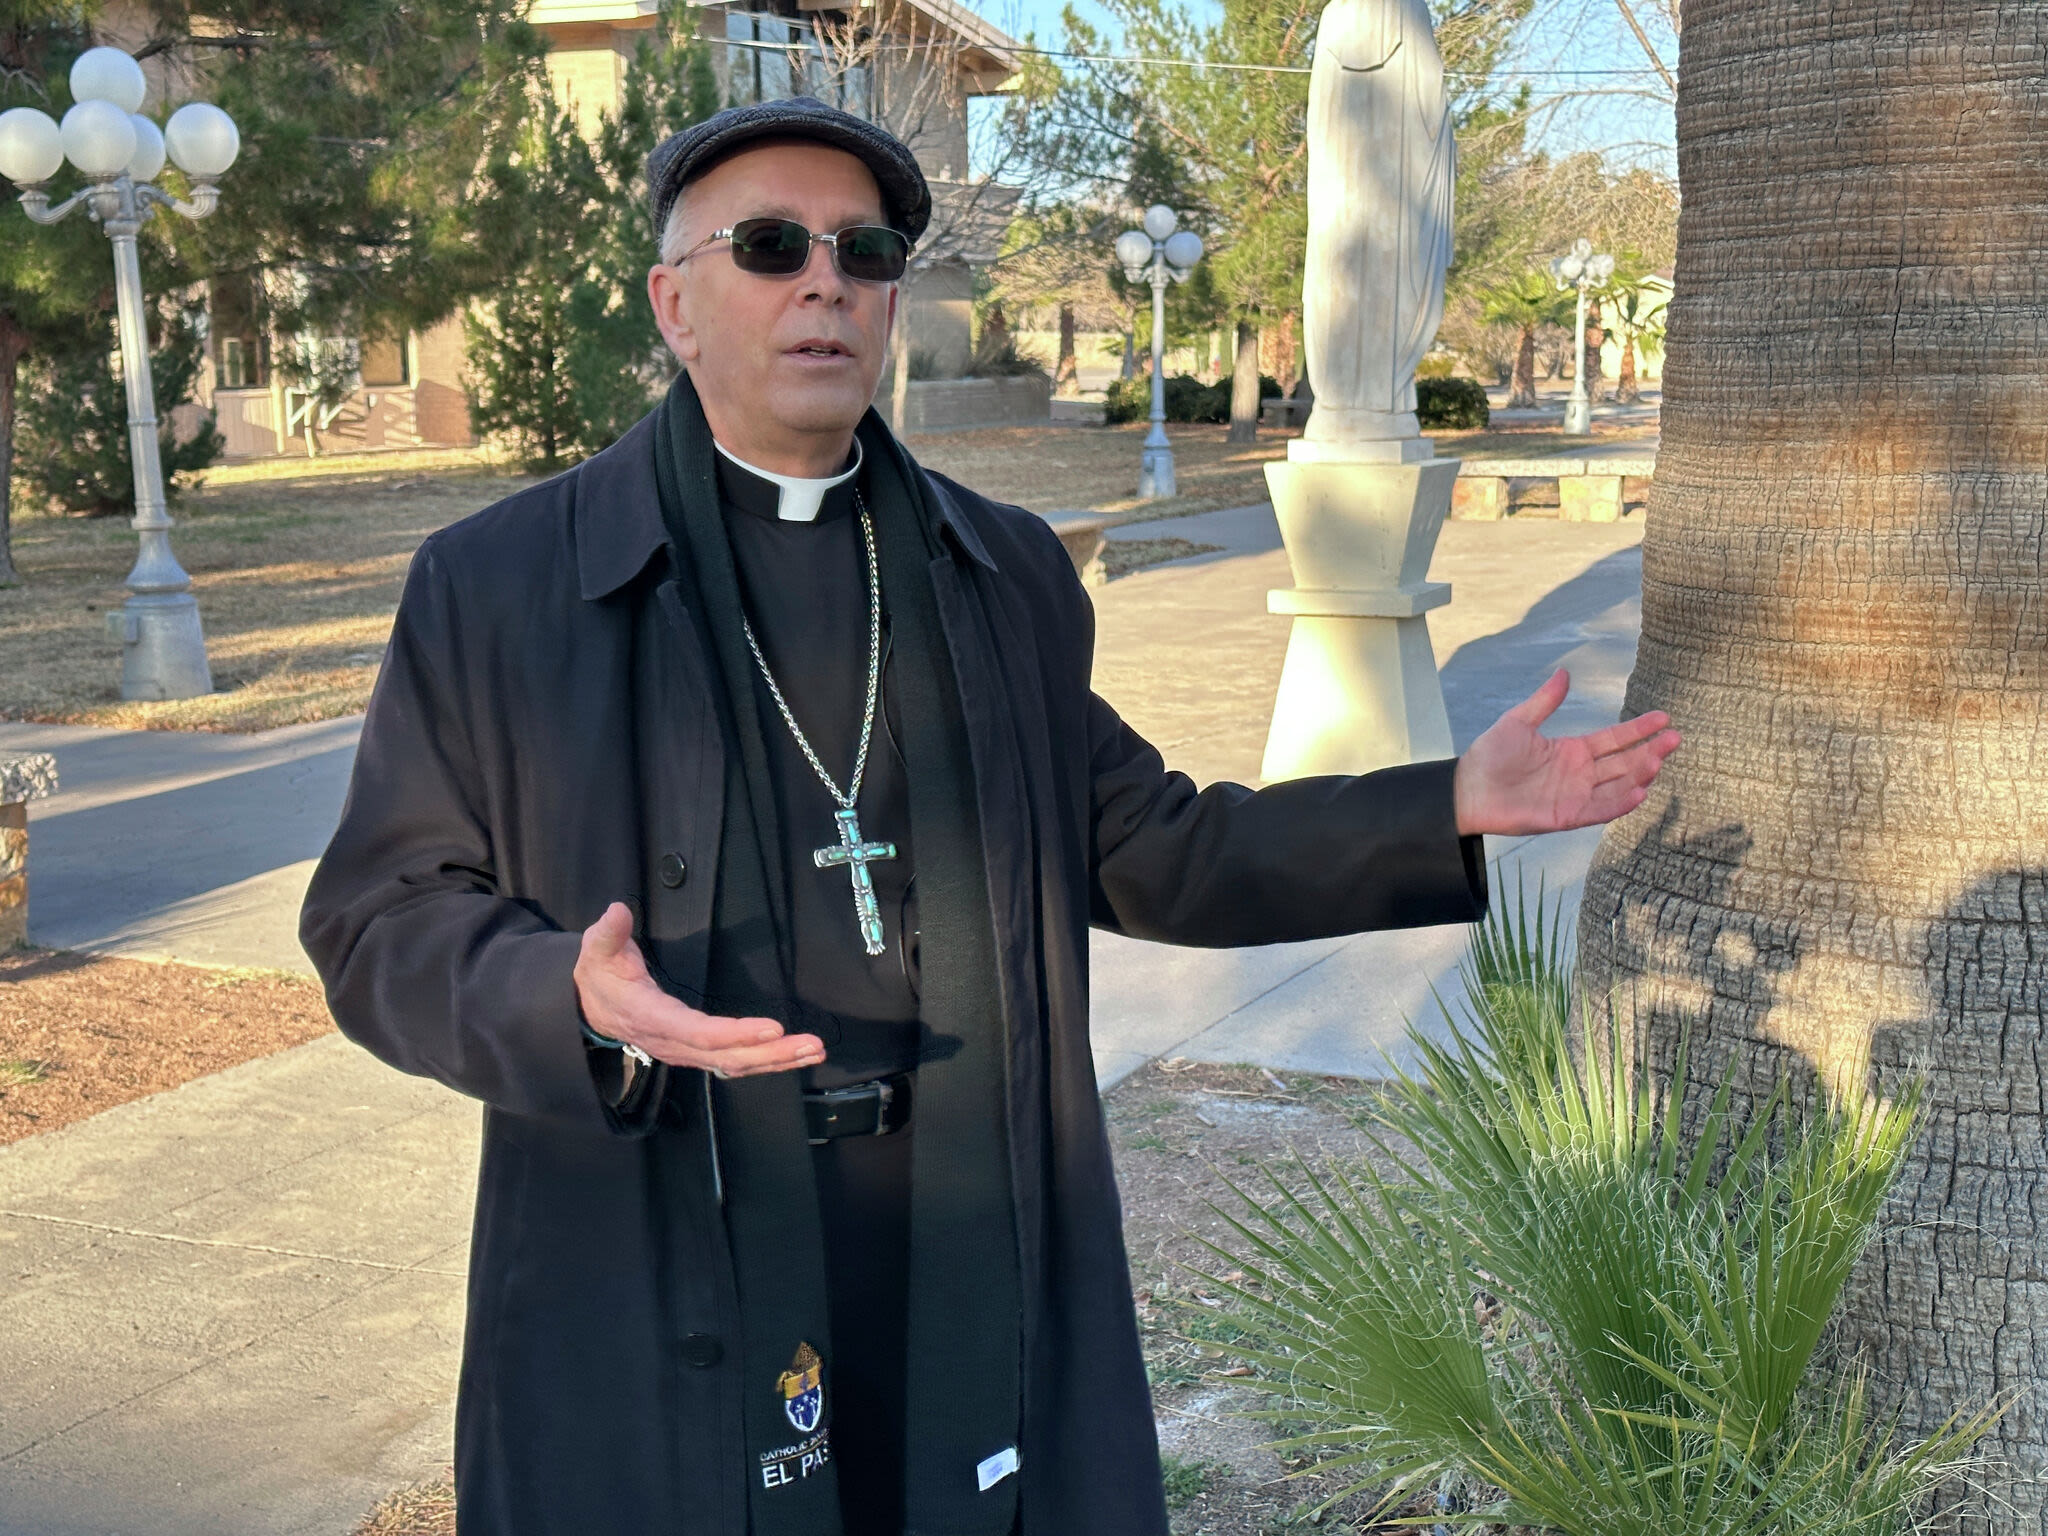 El Paso bishop takes on the Texas AG over immigration